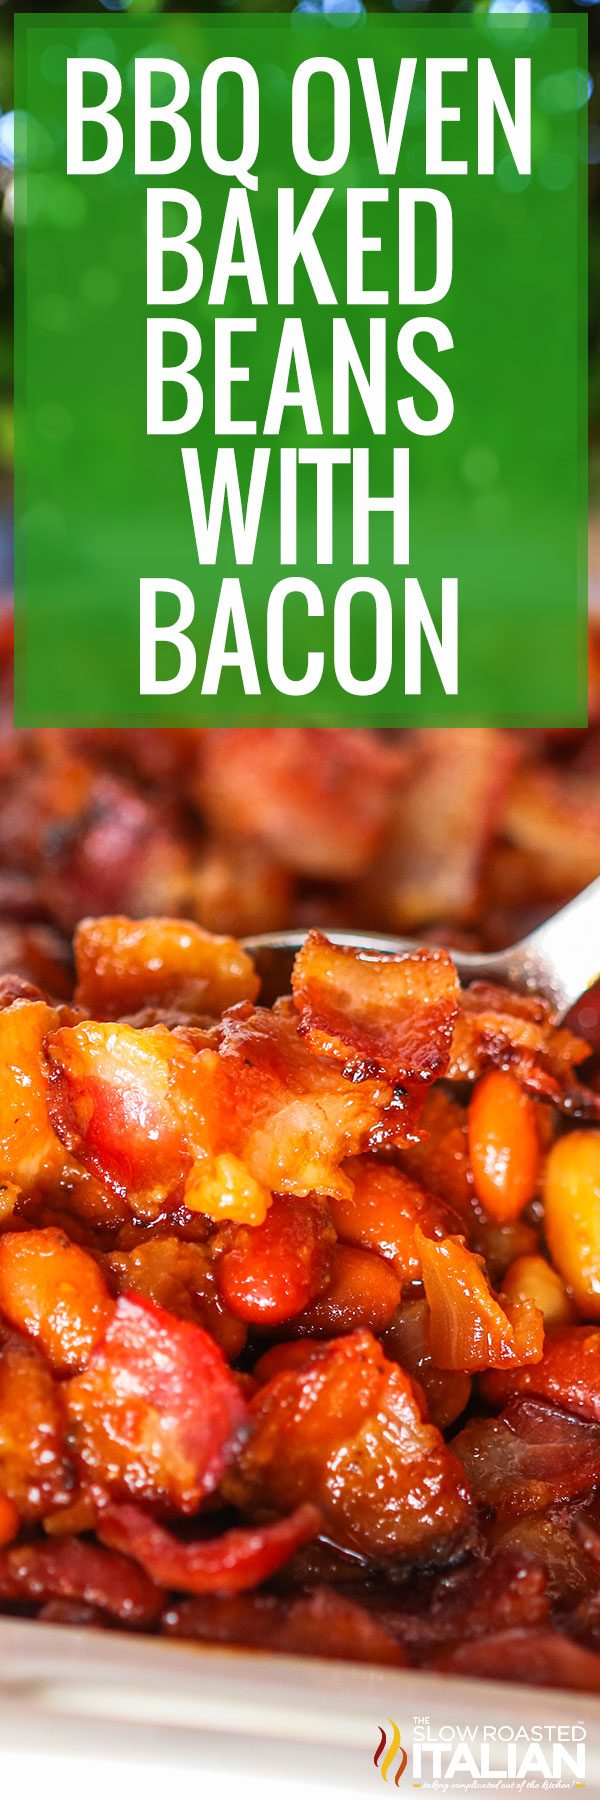 titled image for bbq oven baked beans with bacon